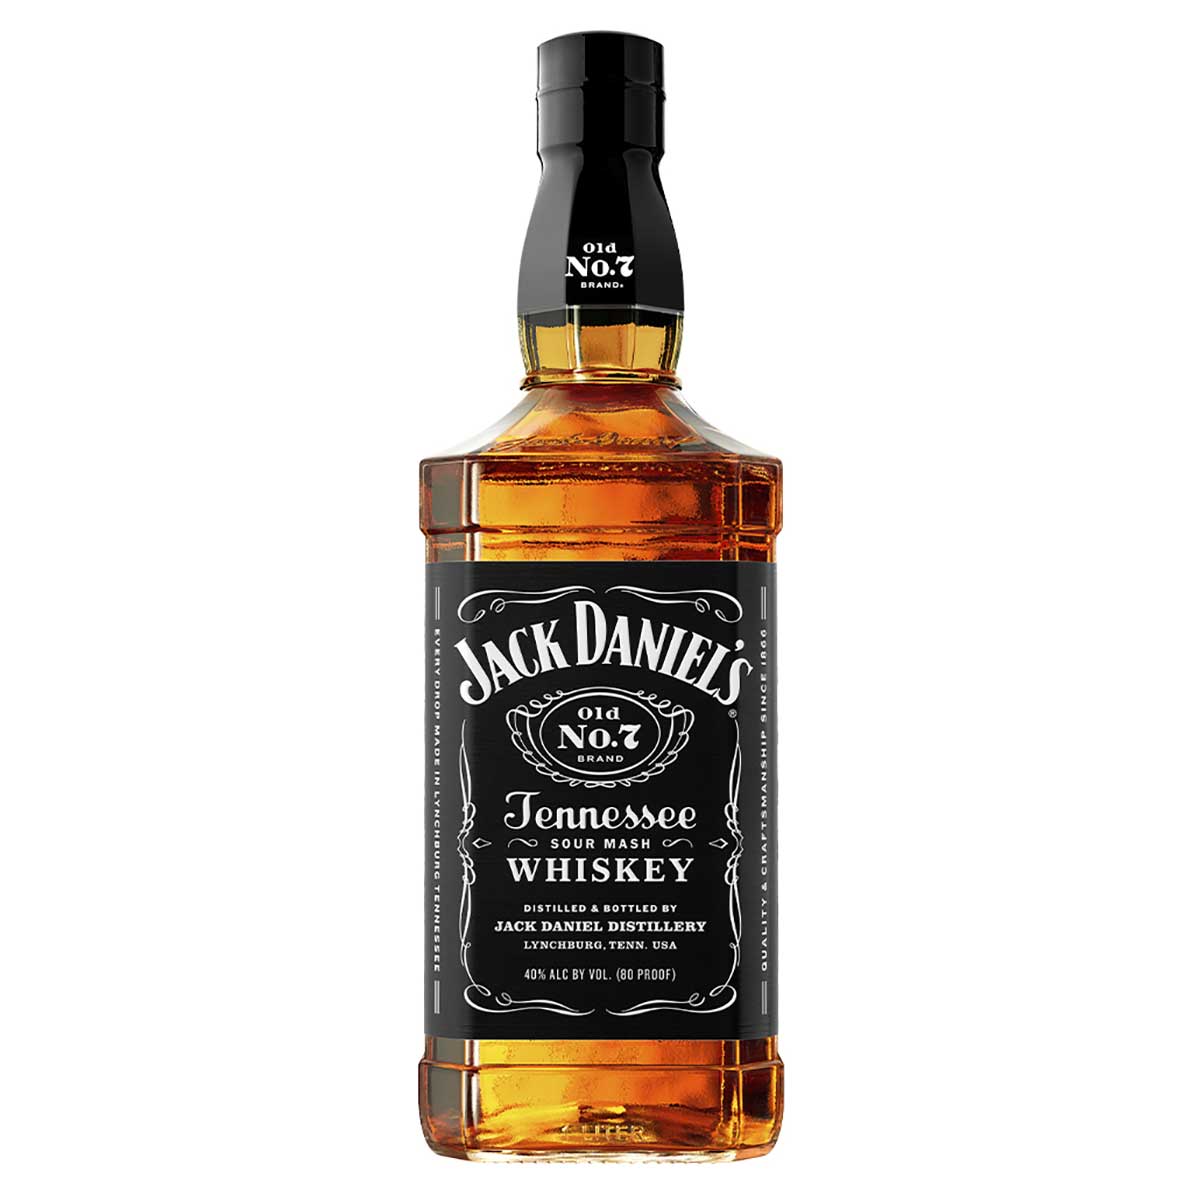 Whisky Jack Daniel’s Old No. 7 Tennessee Whiskey 1L